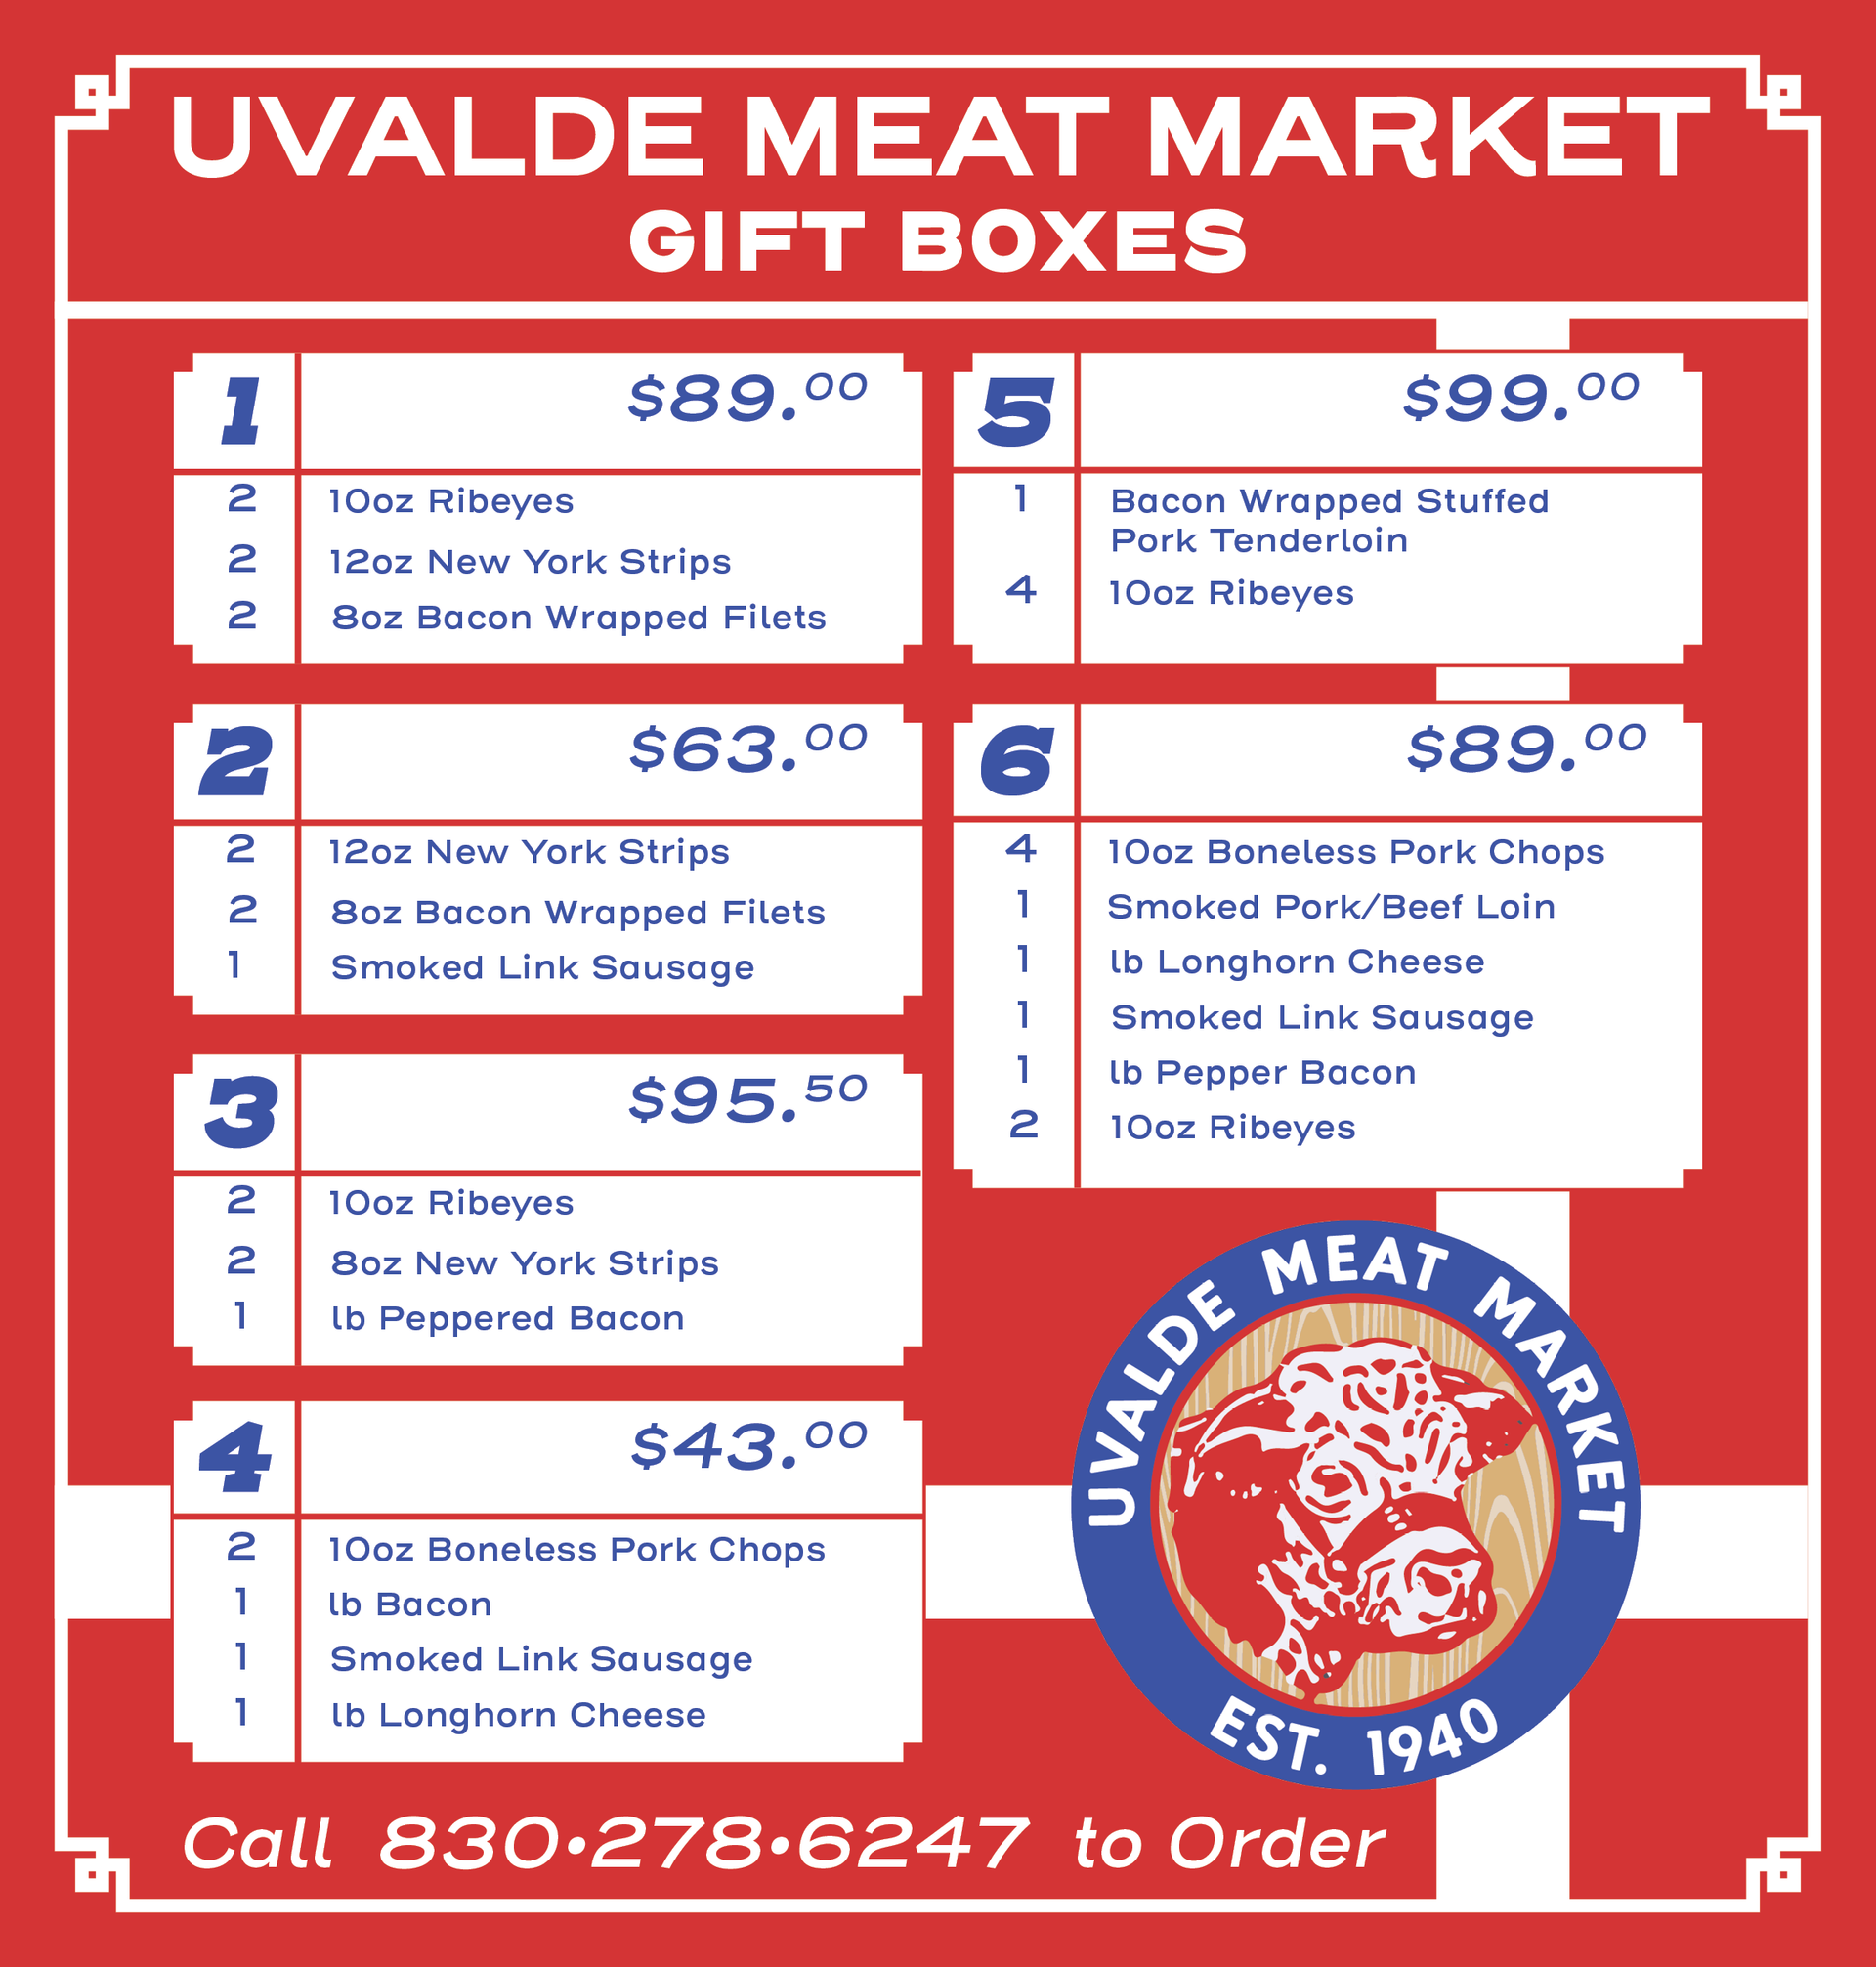 Uvalde Meat Gift Boxes